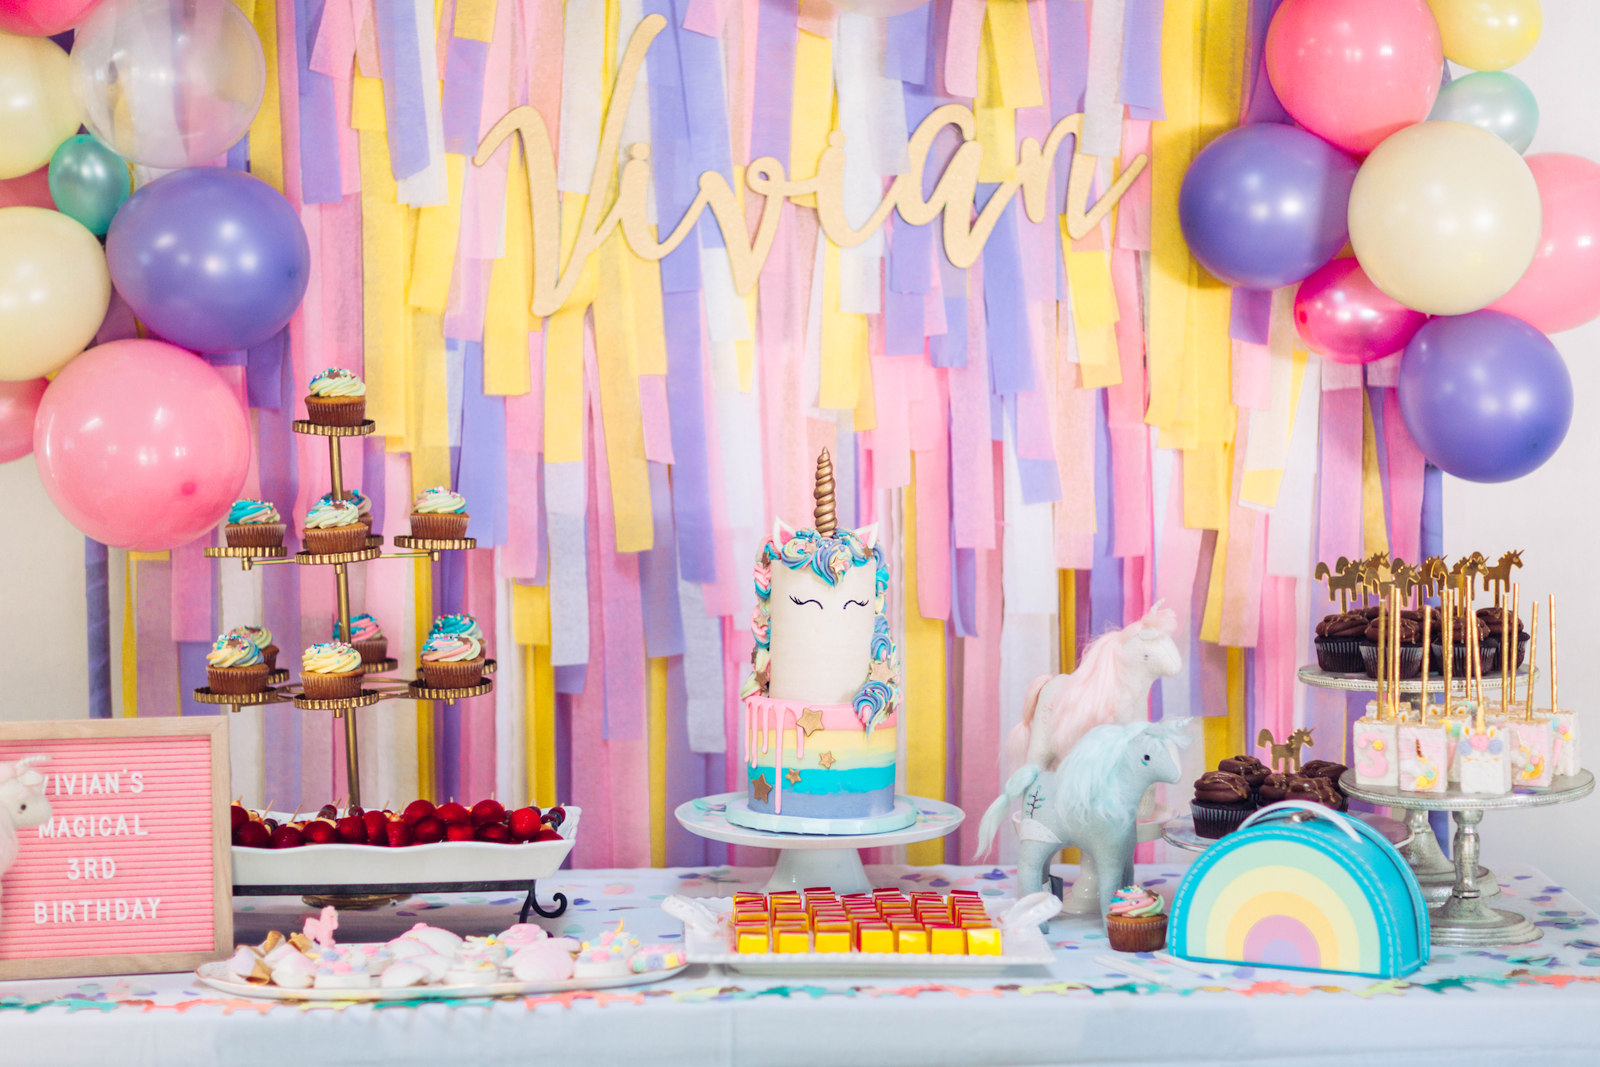 Rainbow Birthday Party in pastel colors - My Party Design